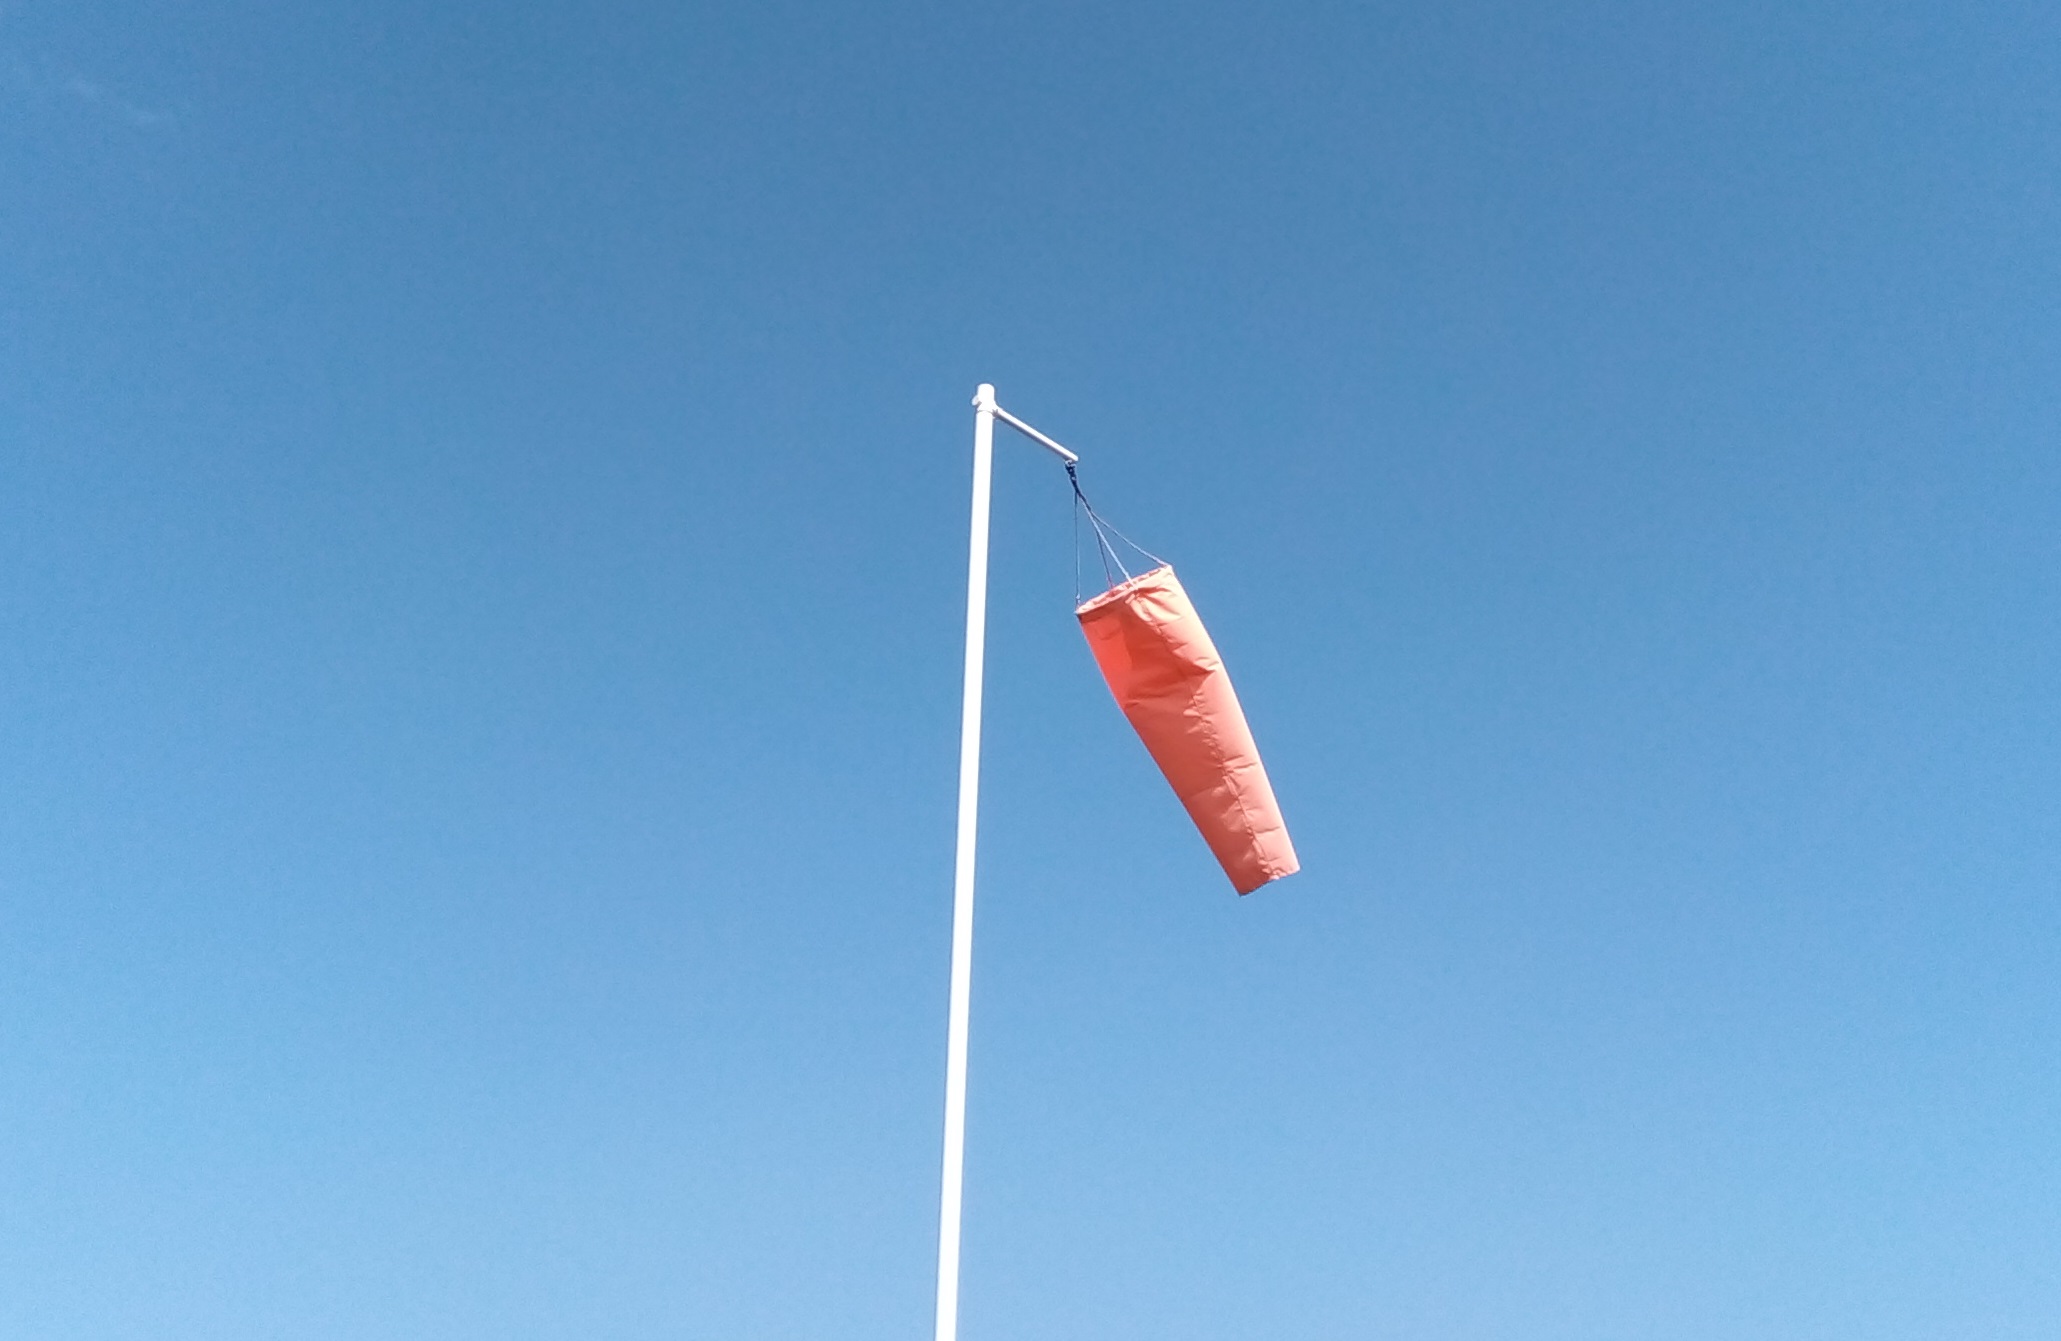 A windsock is viewed on a sunny day against a clear, bright blue sky